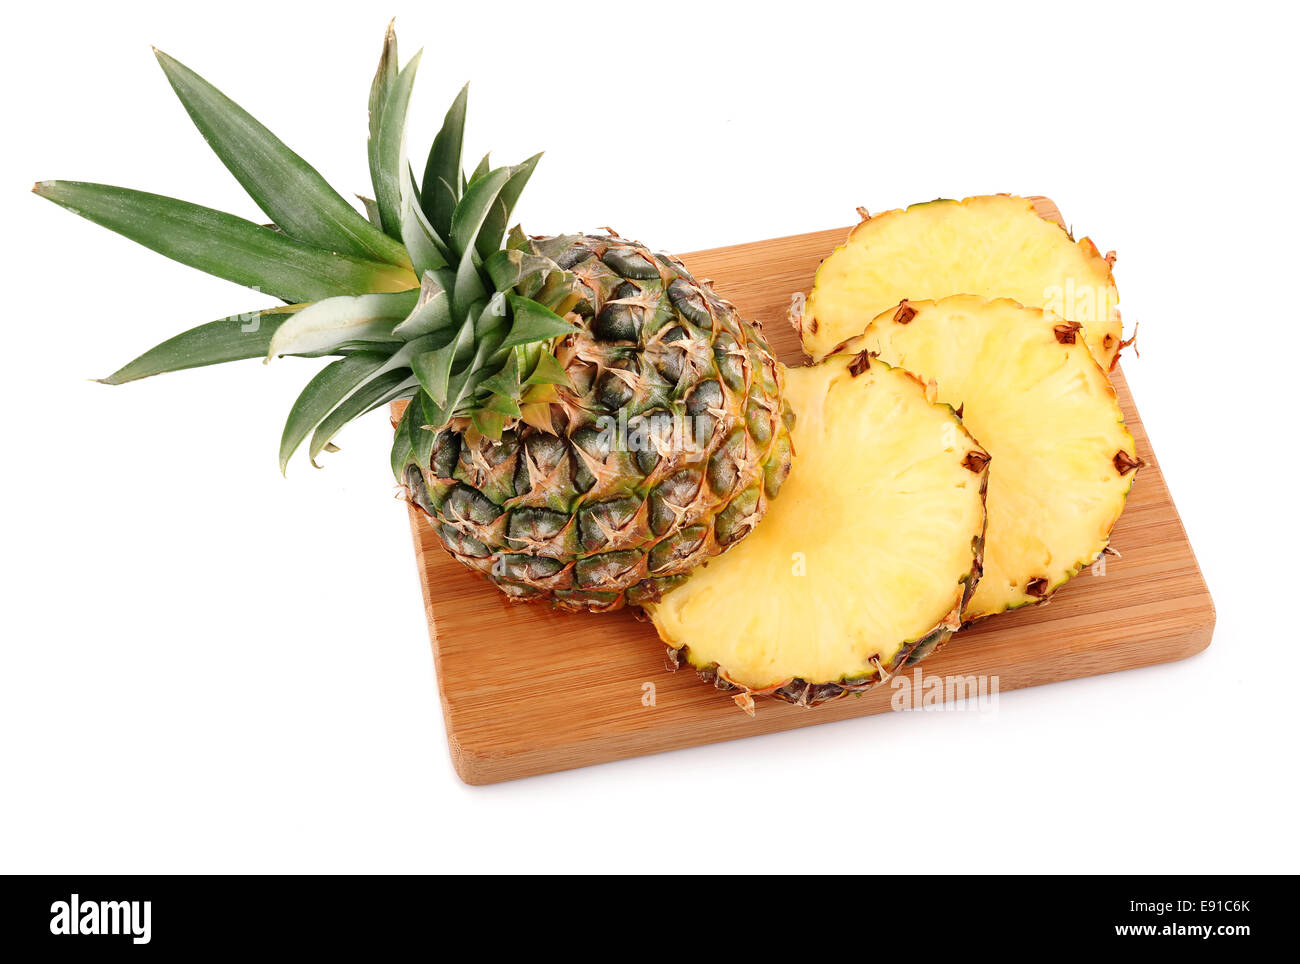 Ripe pineapple fruit with slices isolated Stock Photo